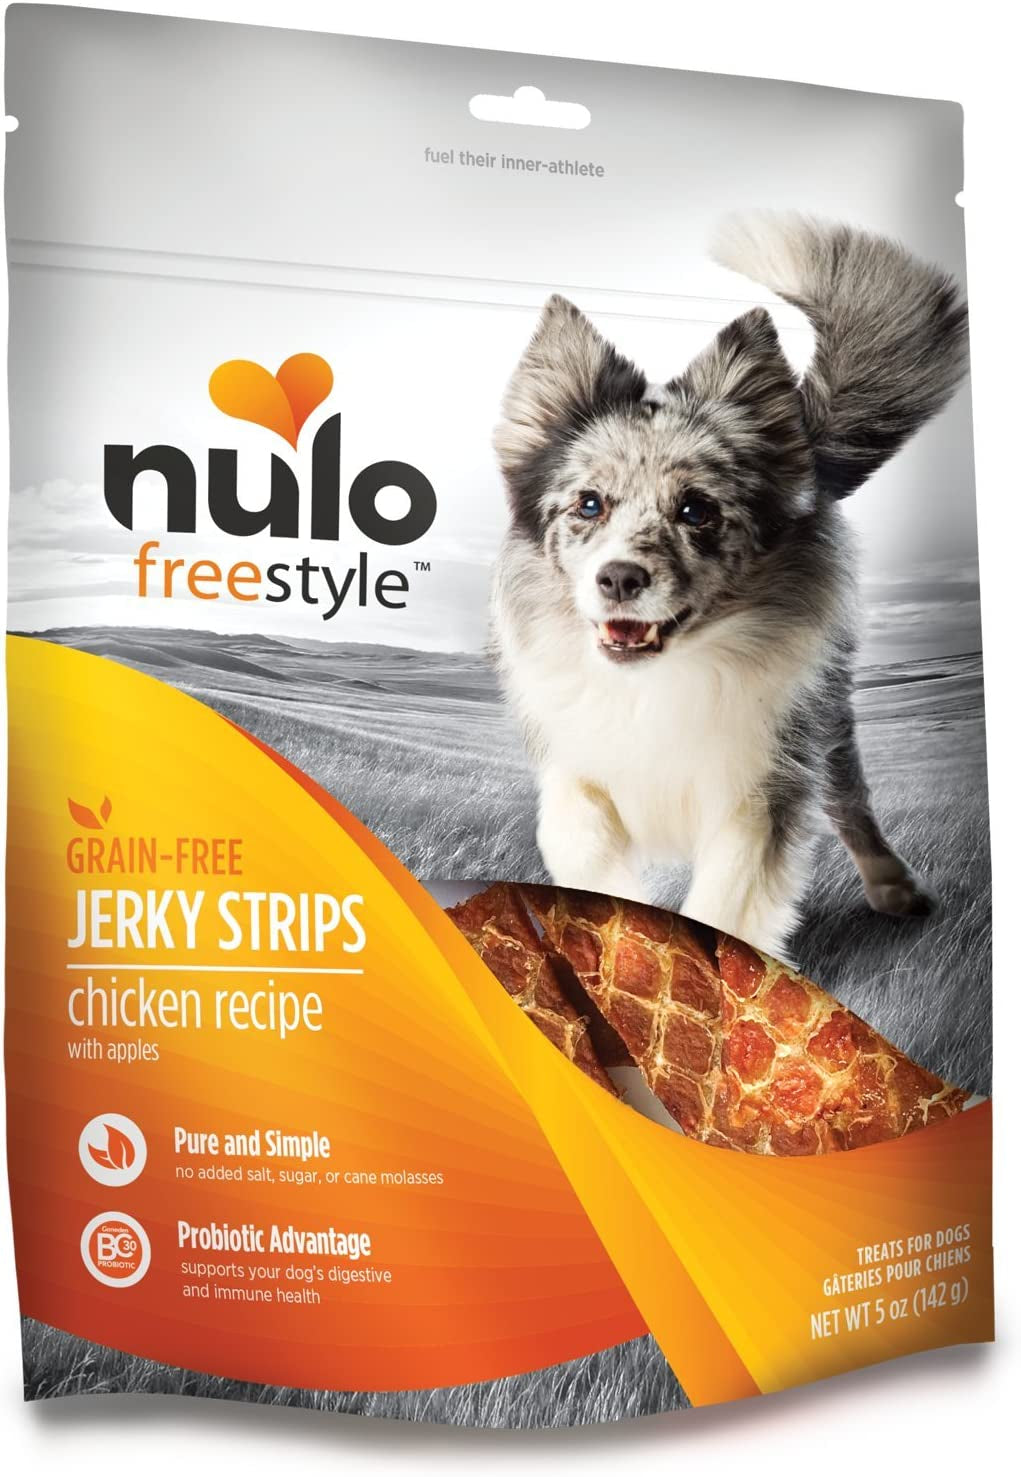 Nulo Freestyle Jerky Dog Treats: Healthy Grain Free Dog Treat - Natural Dog Treats for Training or Reward - Real Meat Strips for Puppy and Adult Dogs - Chicken with Apples Recipe - 5 Oz Bag